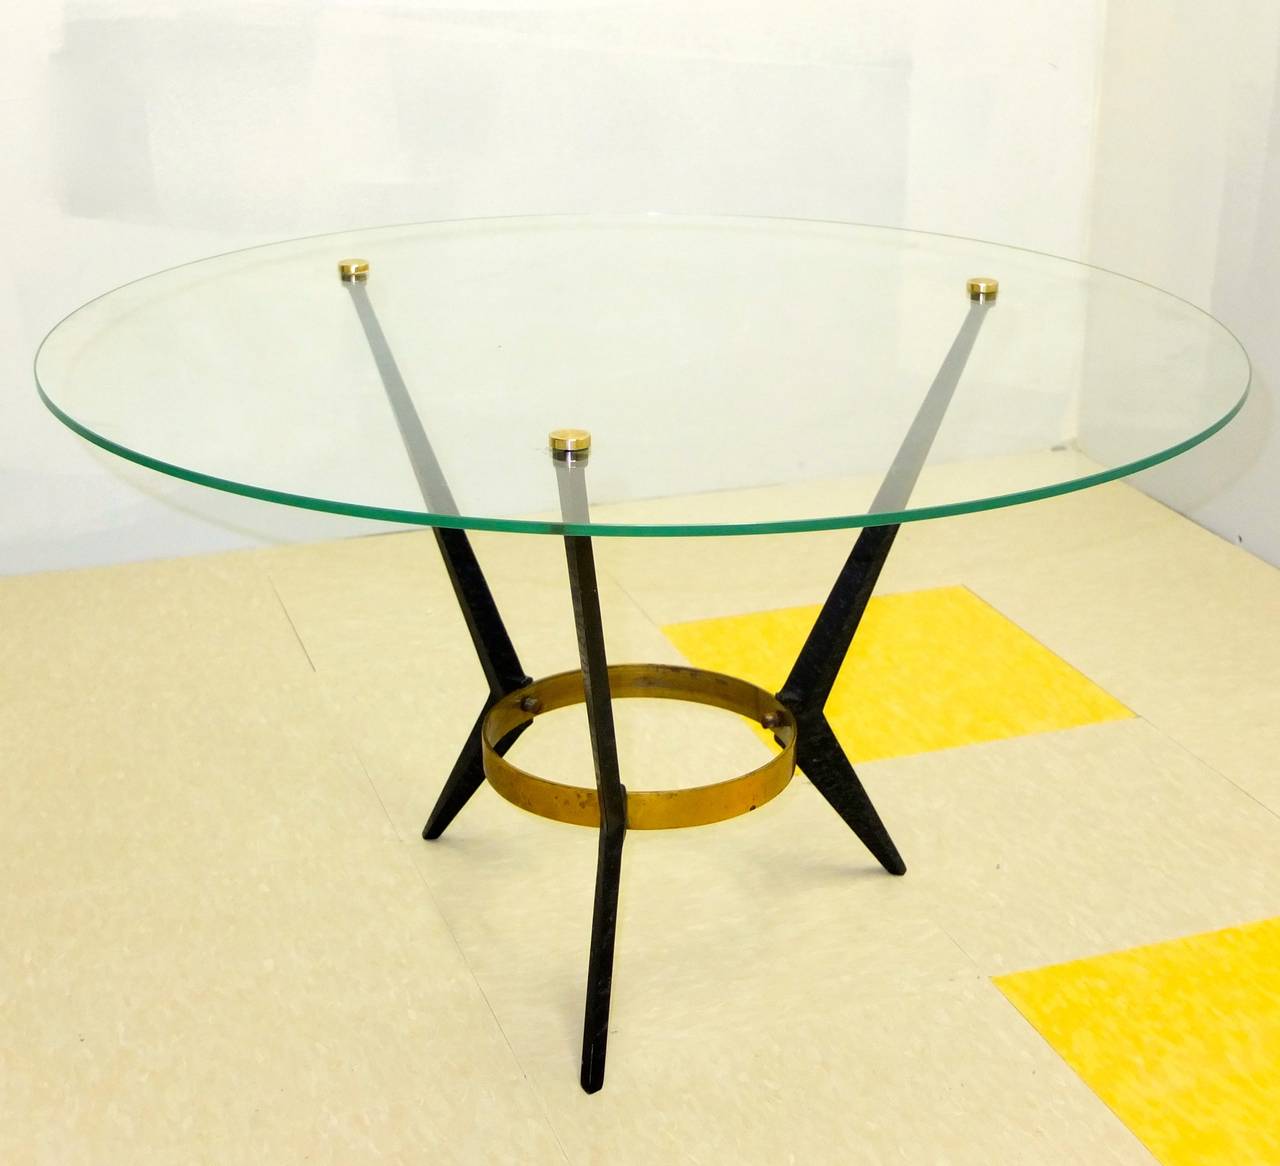 Early 1960s three leg cocktail table with round glass top by Angelo Ostuni, each leg made from cast aluminum finished in matte black in geometric angular tapered form around a round brass flat bar band. The round glass top is held in place by three